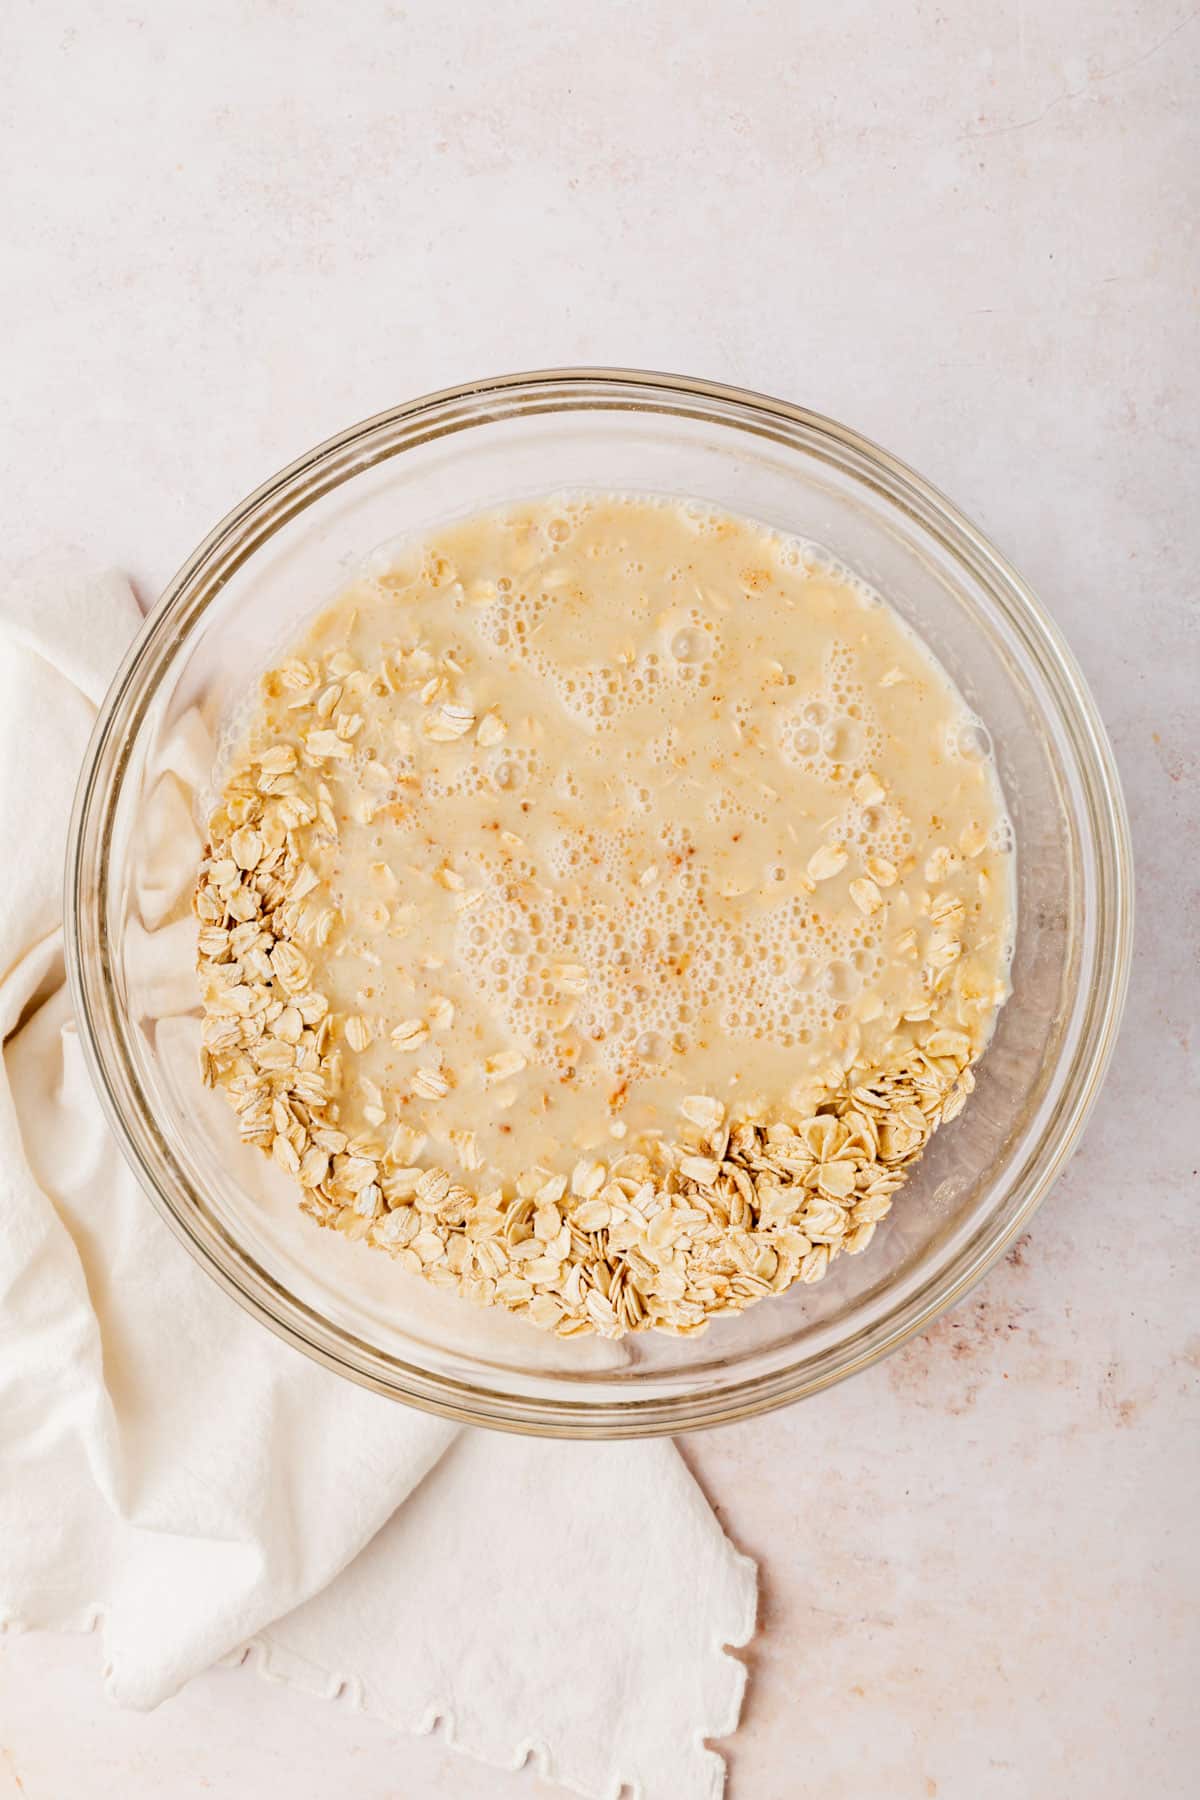 A glass mixing bowl with gluten-free oats topped with an almond milk mixture before mixing together.